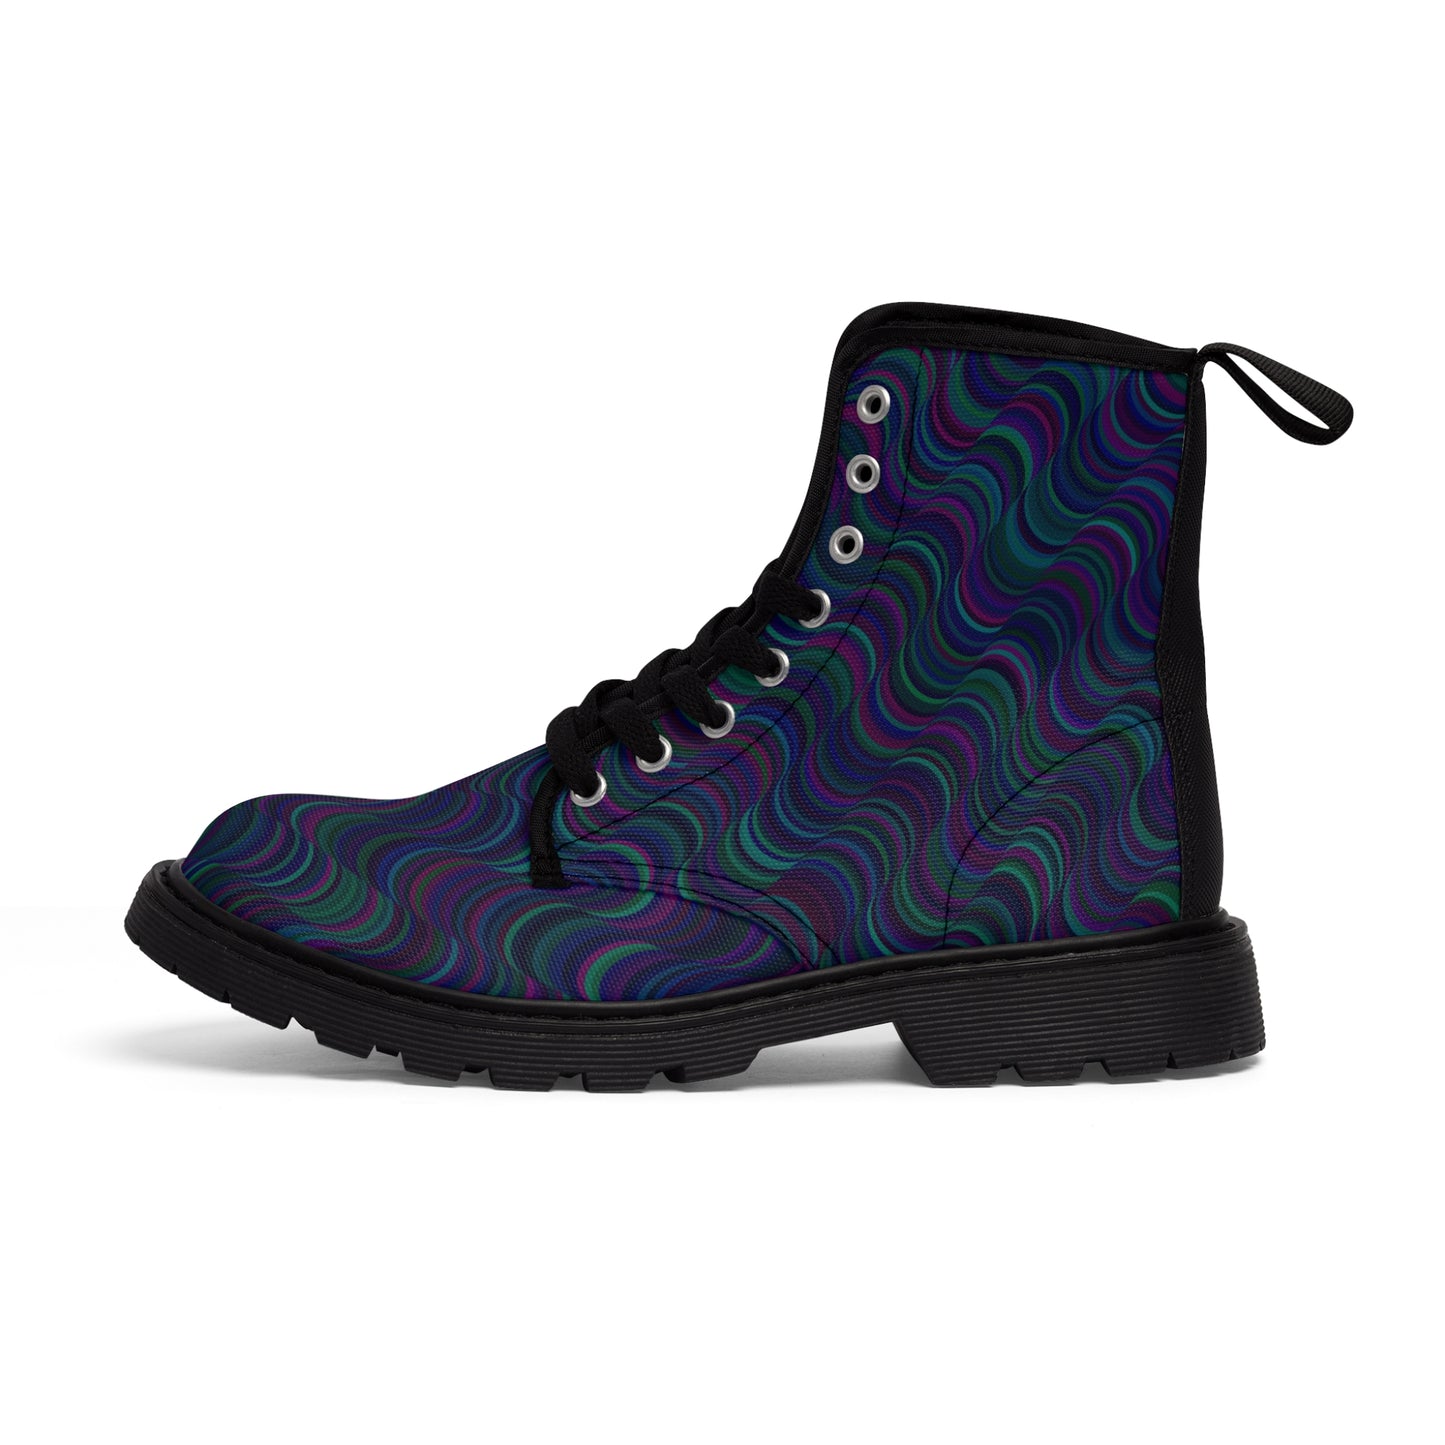 Women's Canvas Boots "Waves of Confusion"